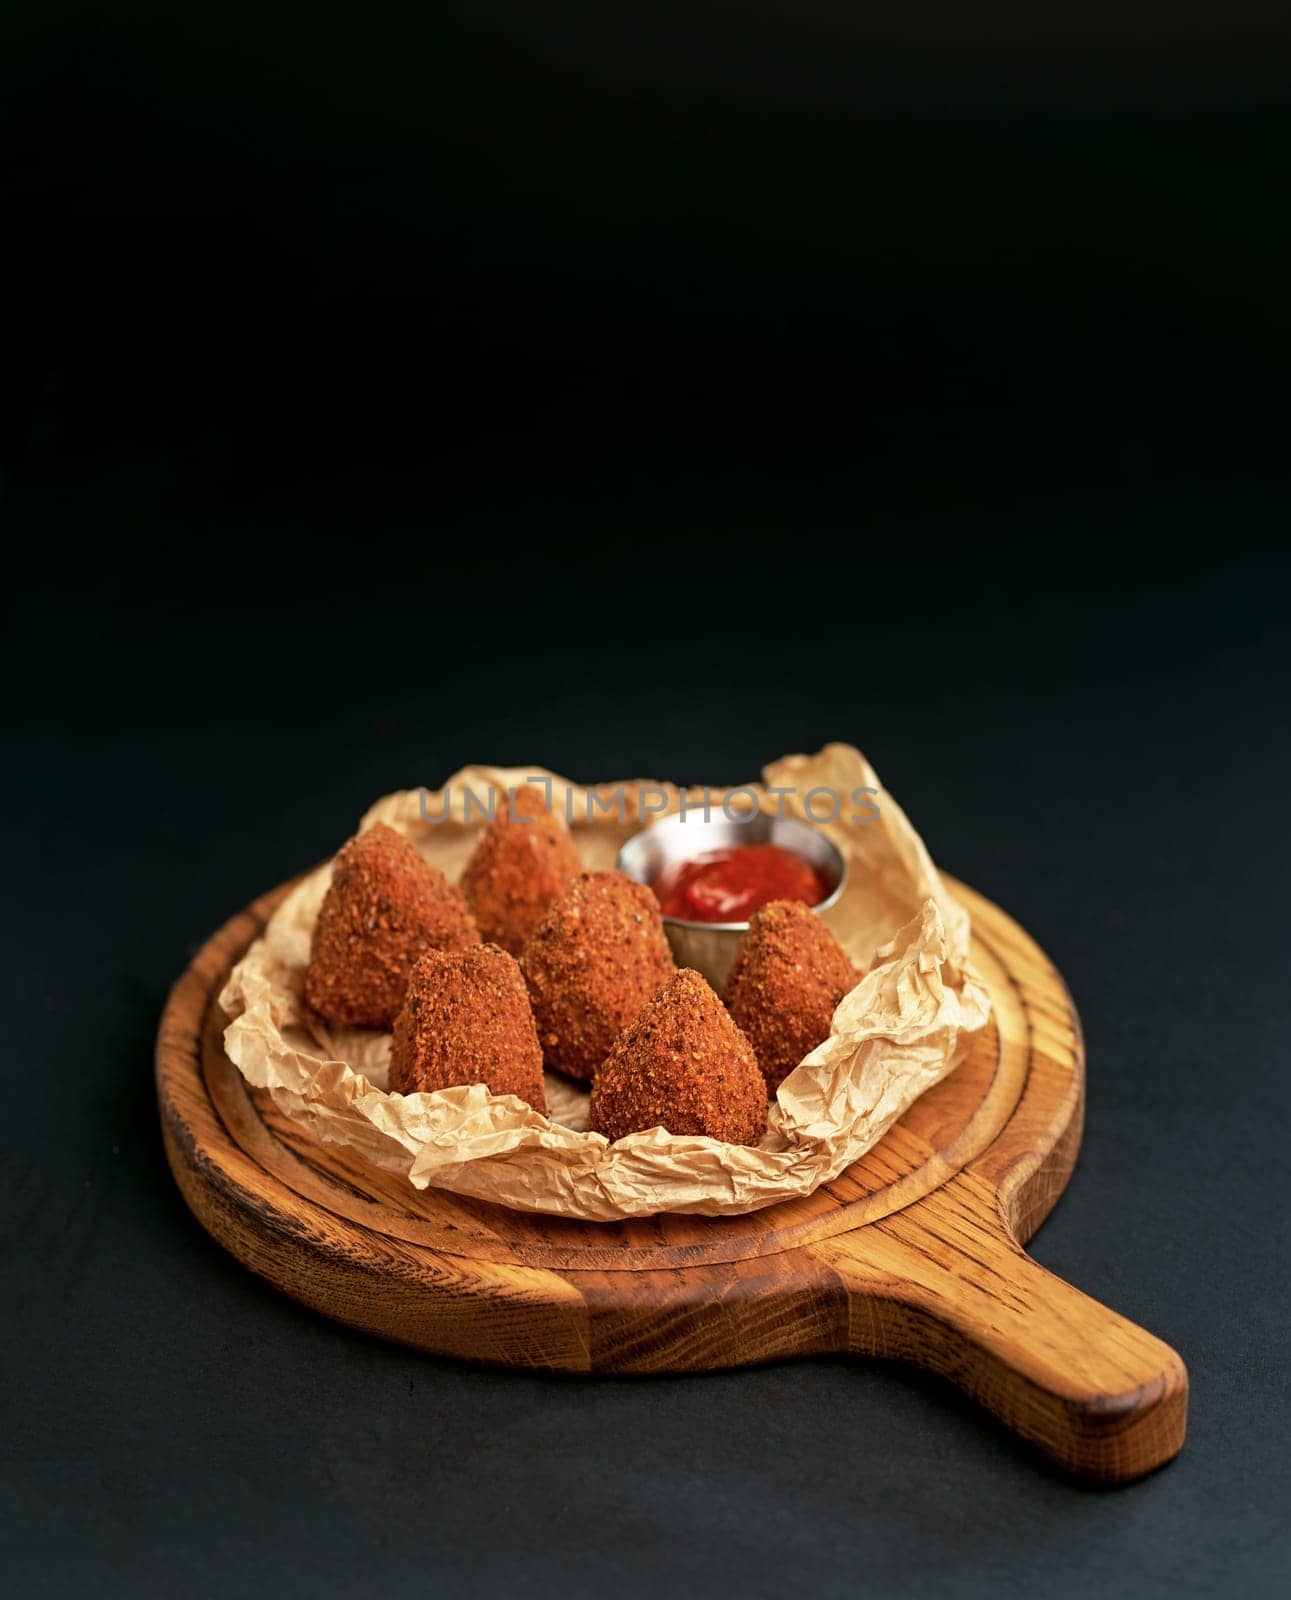 Deep fried crispy Camembert with cranberry sauce in a decorative pan on wooden background.